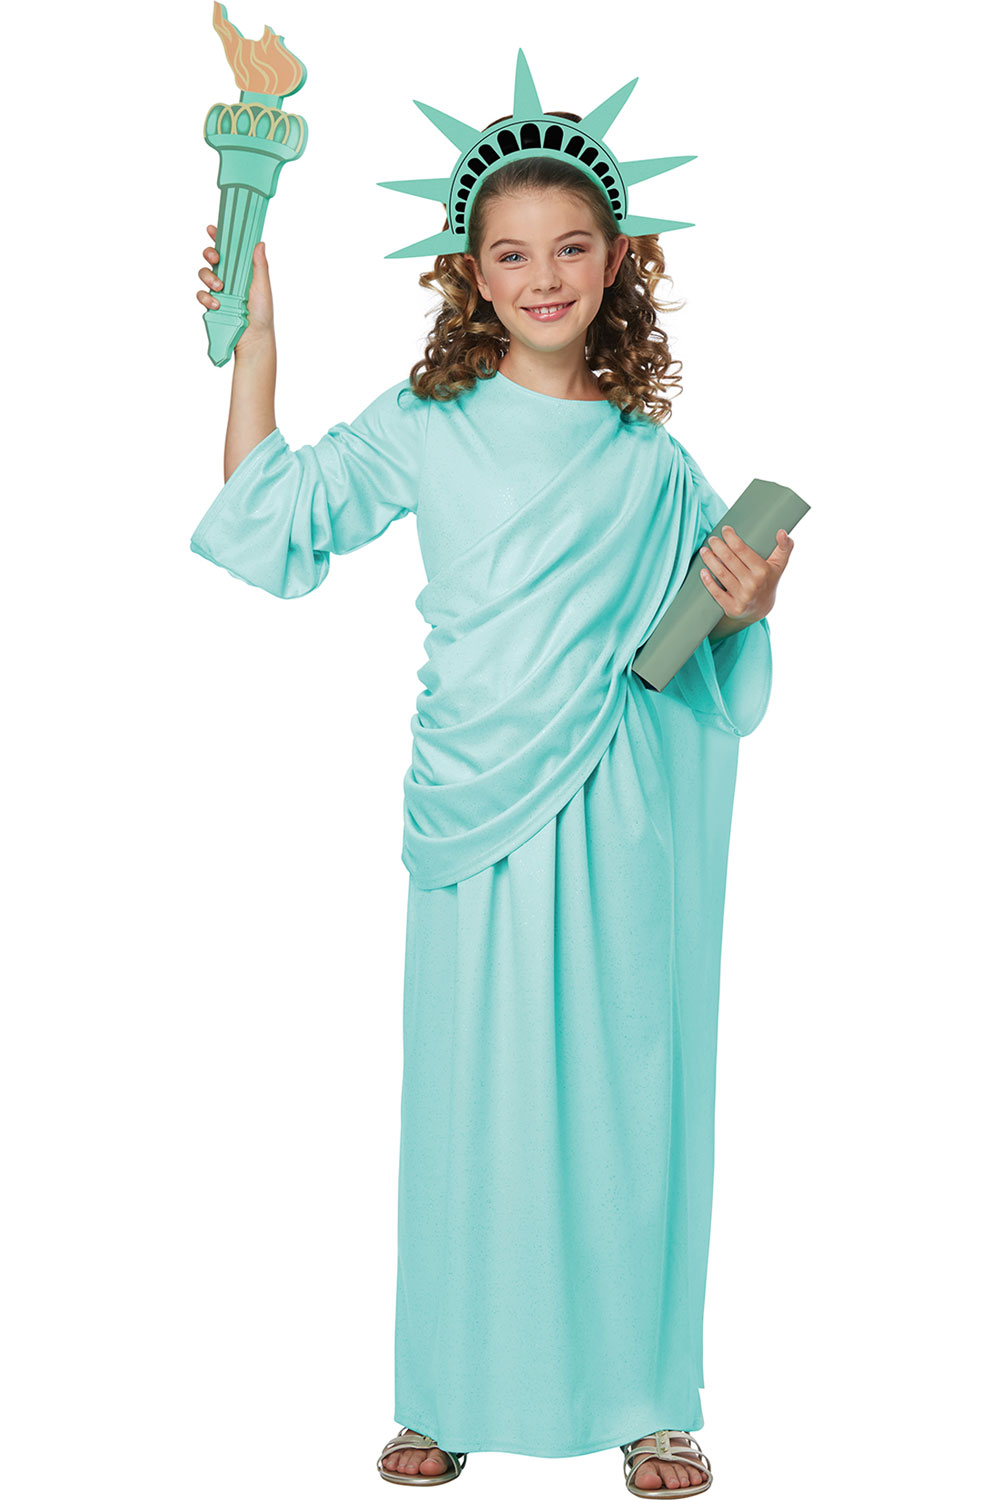 Details about   California Costume Statue Of Liberty USA America Child Halloween Costume 00616 